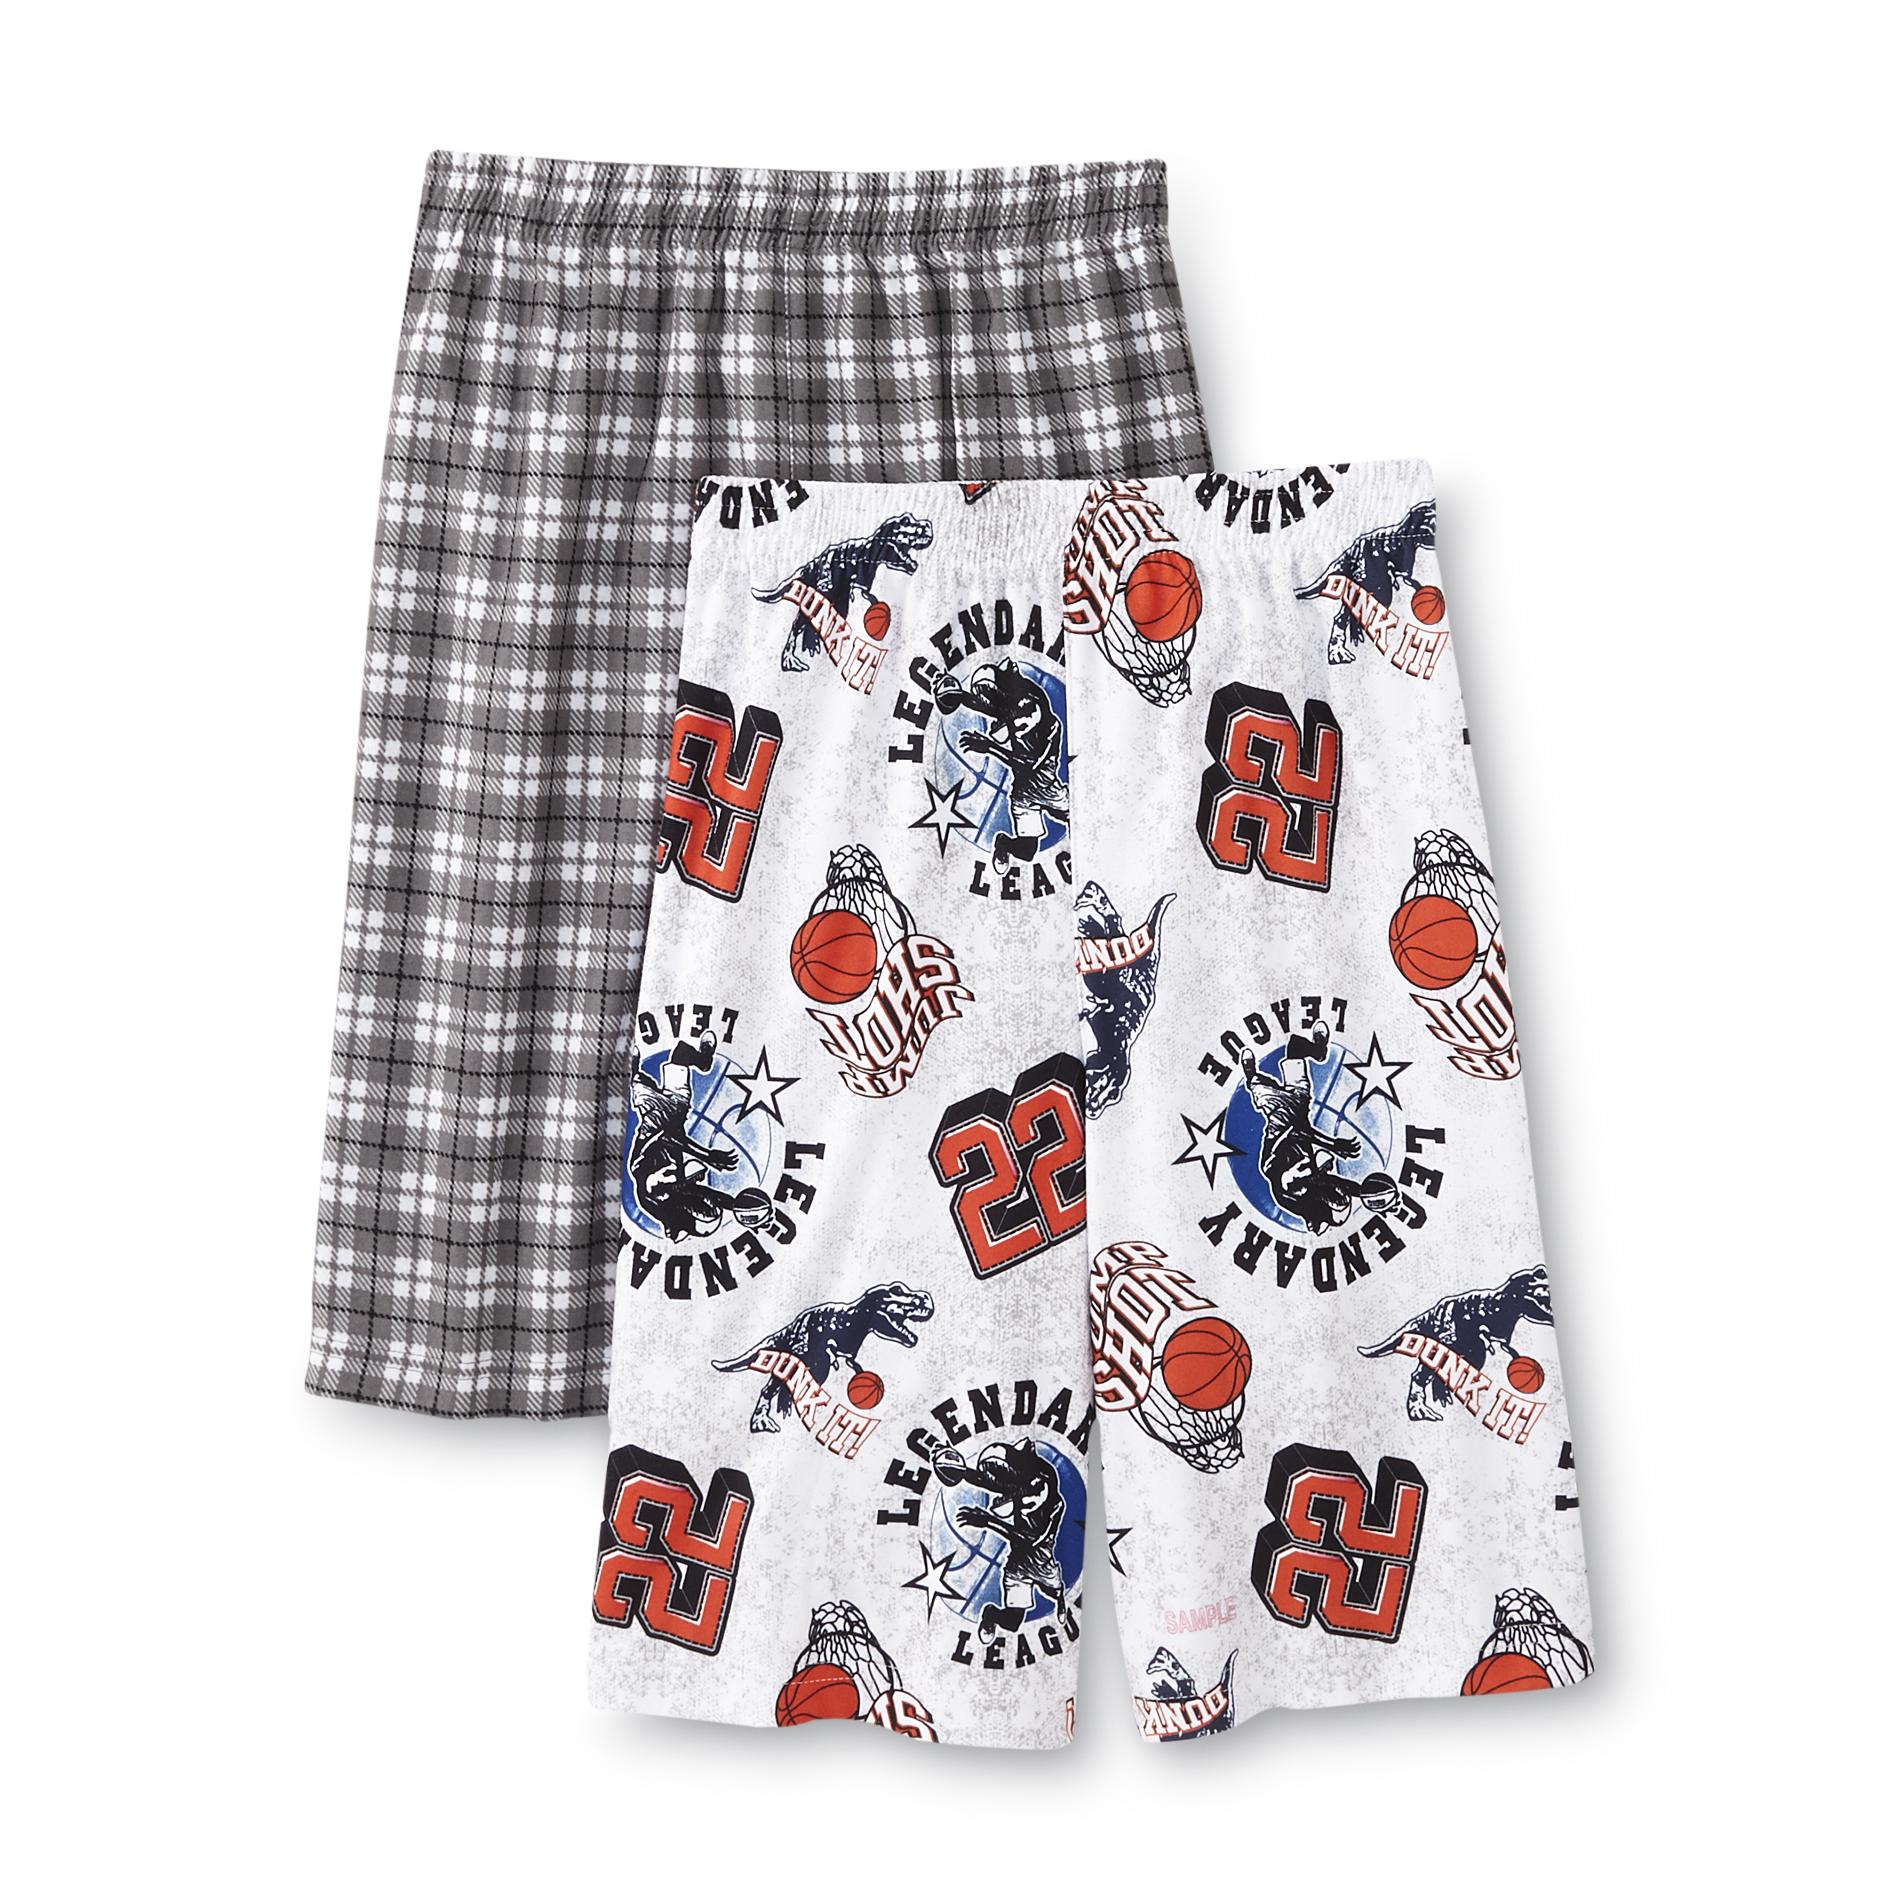 Boy's 2-Pairs Flannel Lounge Shorts - Basketball & Plaid